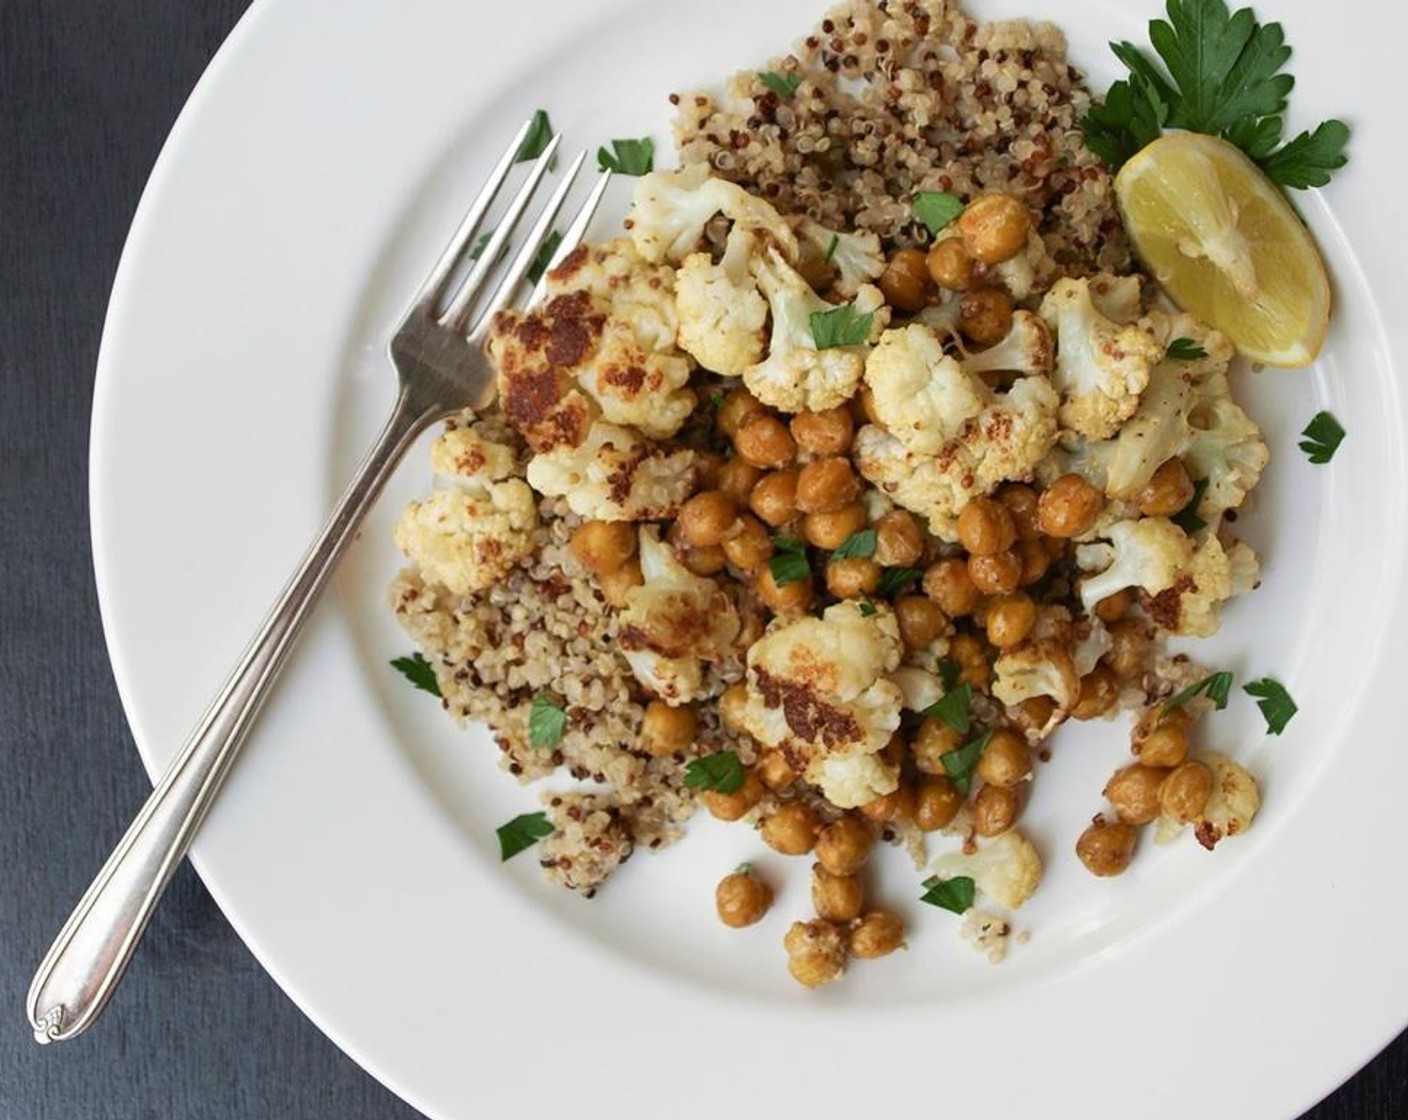 step 7 Serve cauliflower and chickpea mix over a nice bowl of quinoa, and garnish with a sprinkle of Italian Flat-Leaf Parsley (1/4 cup). Tastes great warm or at room temperature.